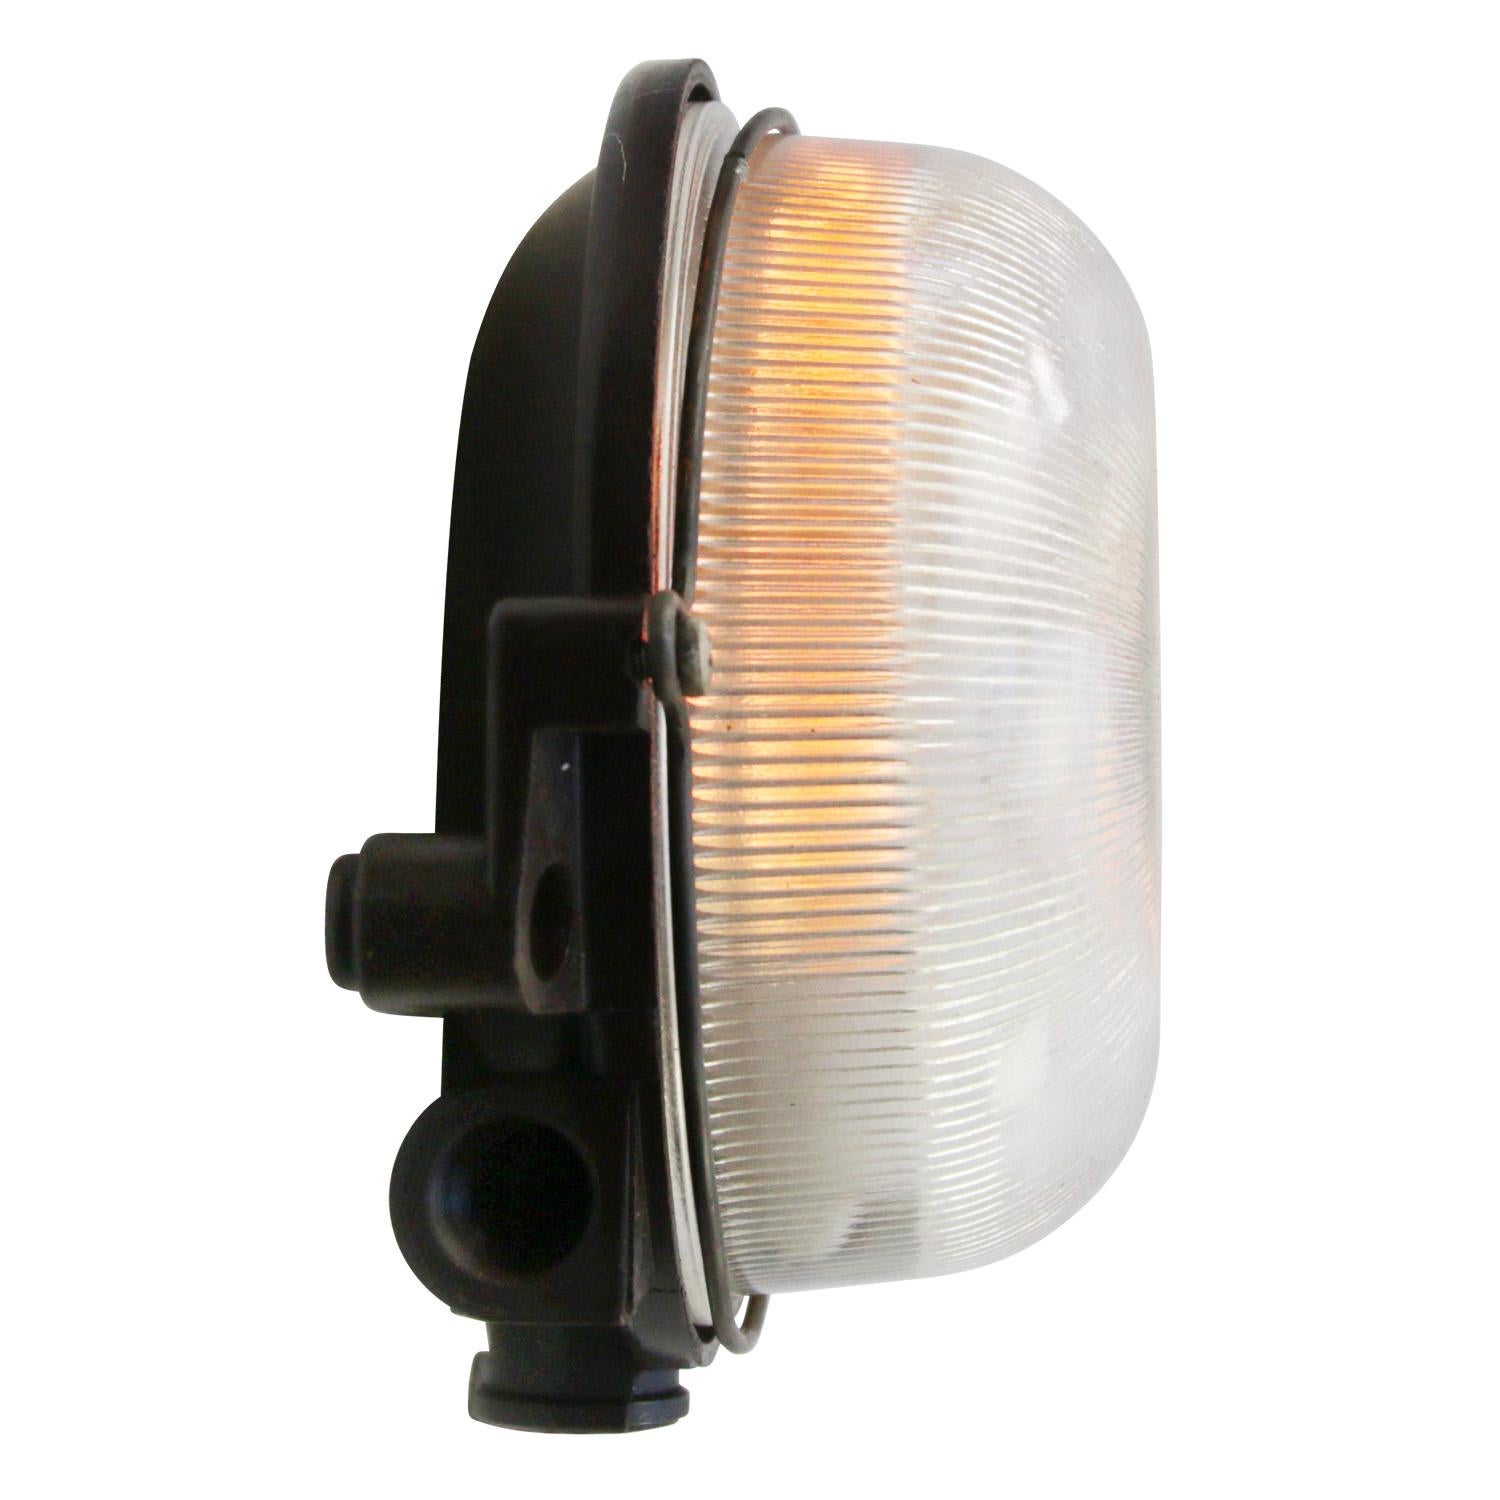 Industrial wall and ceiling scone. Bakelite back. Holophane striped glass.

Weight 1.0 kg / 2.2 lb

Priced per individual item. All lamps have been made suitable by international standards for incandescent light bulbs, energy-efficient and LED